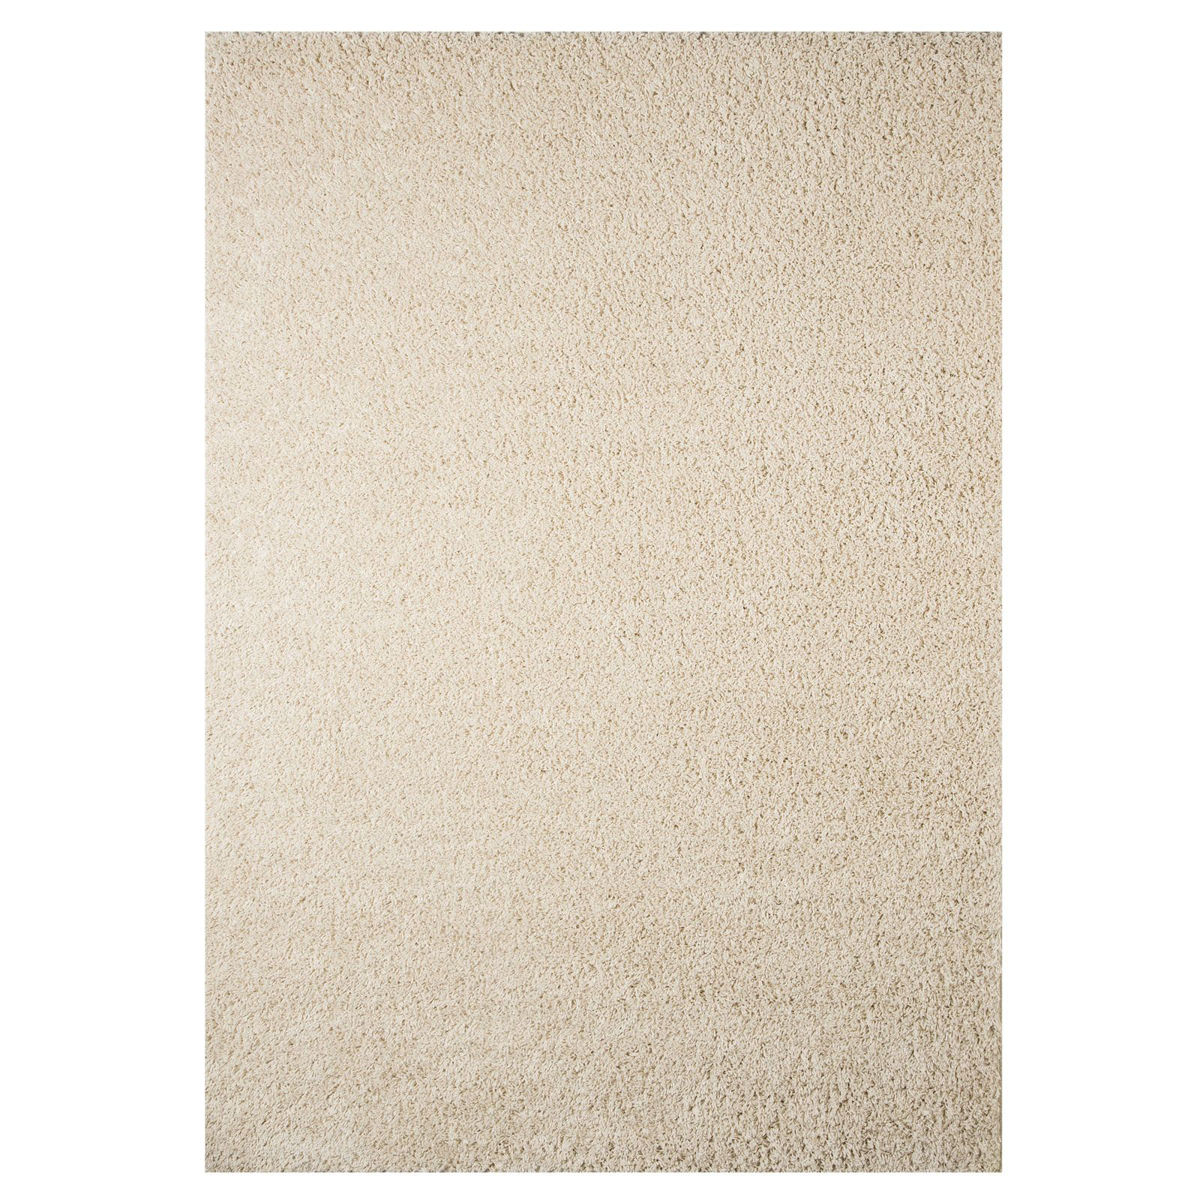 Picture of Caci 5' x 7' Shag Rug